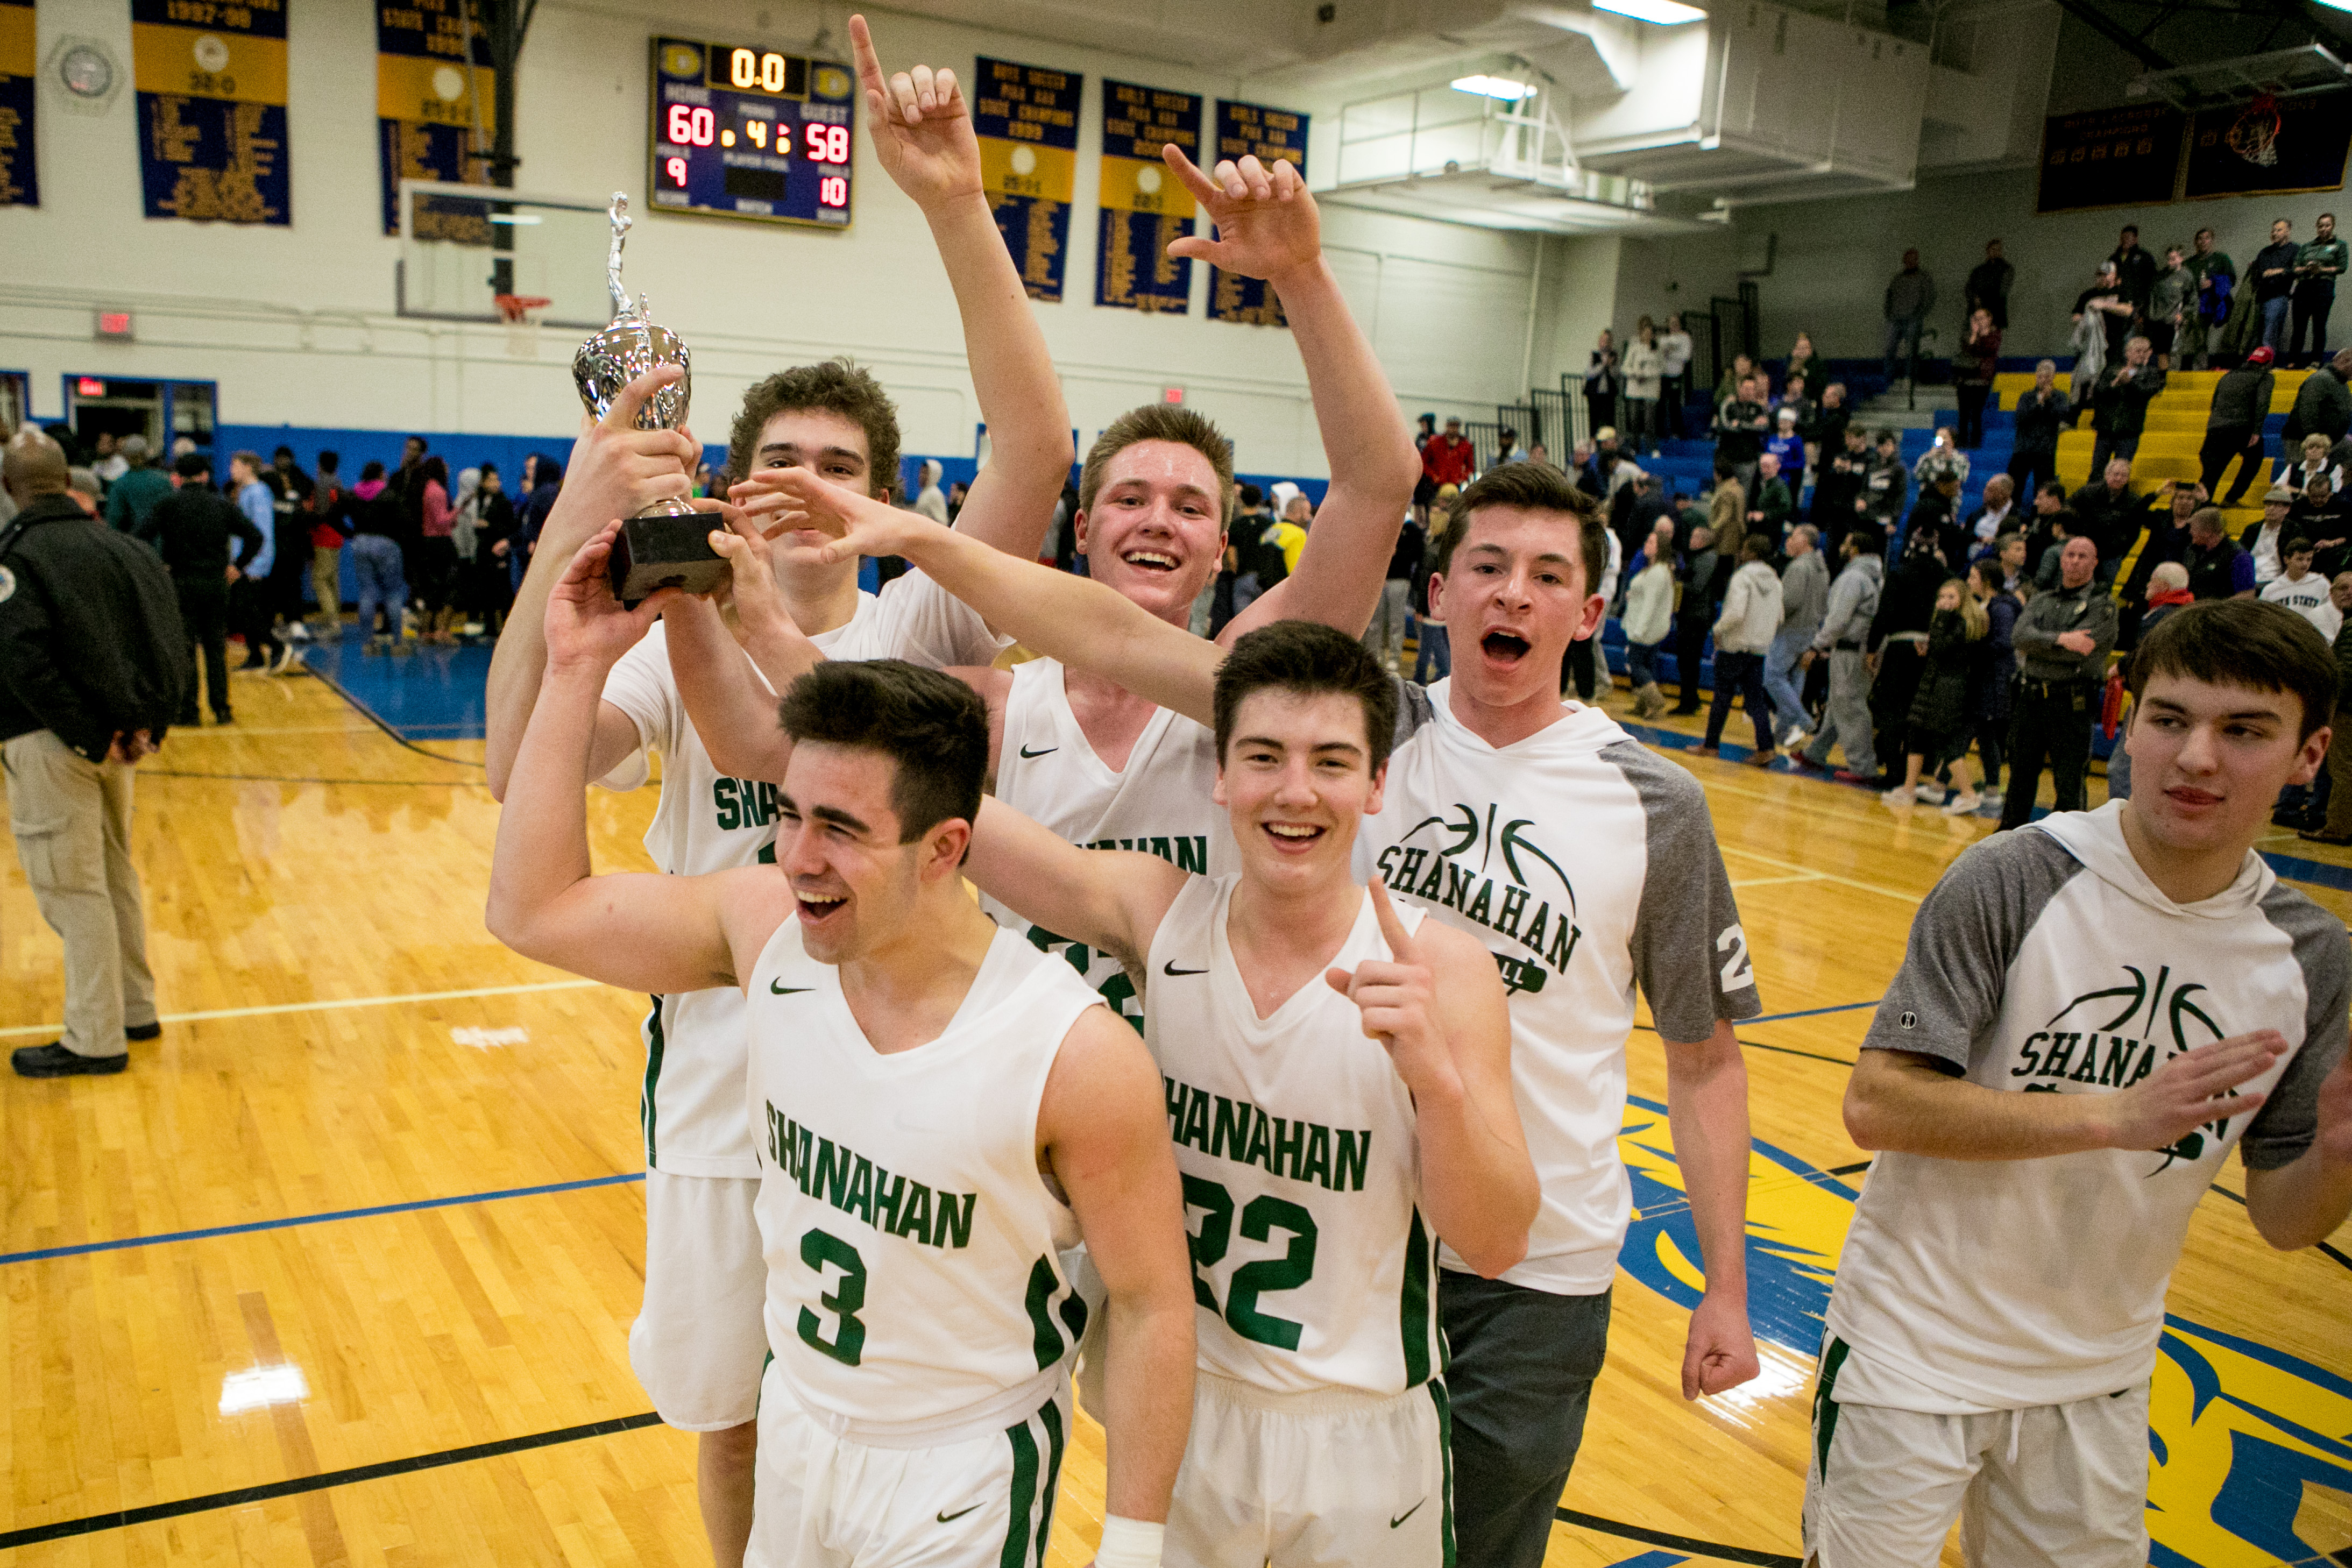 bishop-shanahan-slays-coatesville-in-thriller-to-win-first-ever-ches-mont-title-pa-prep-live